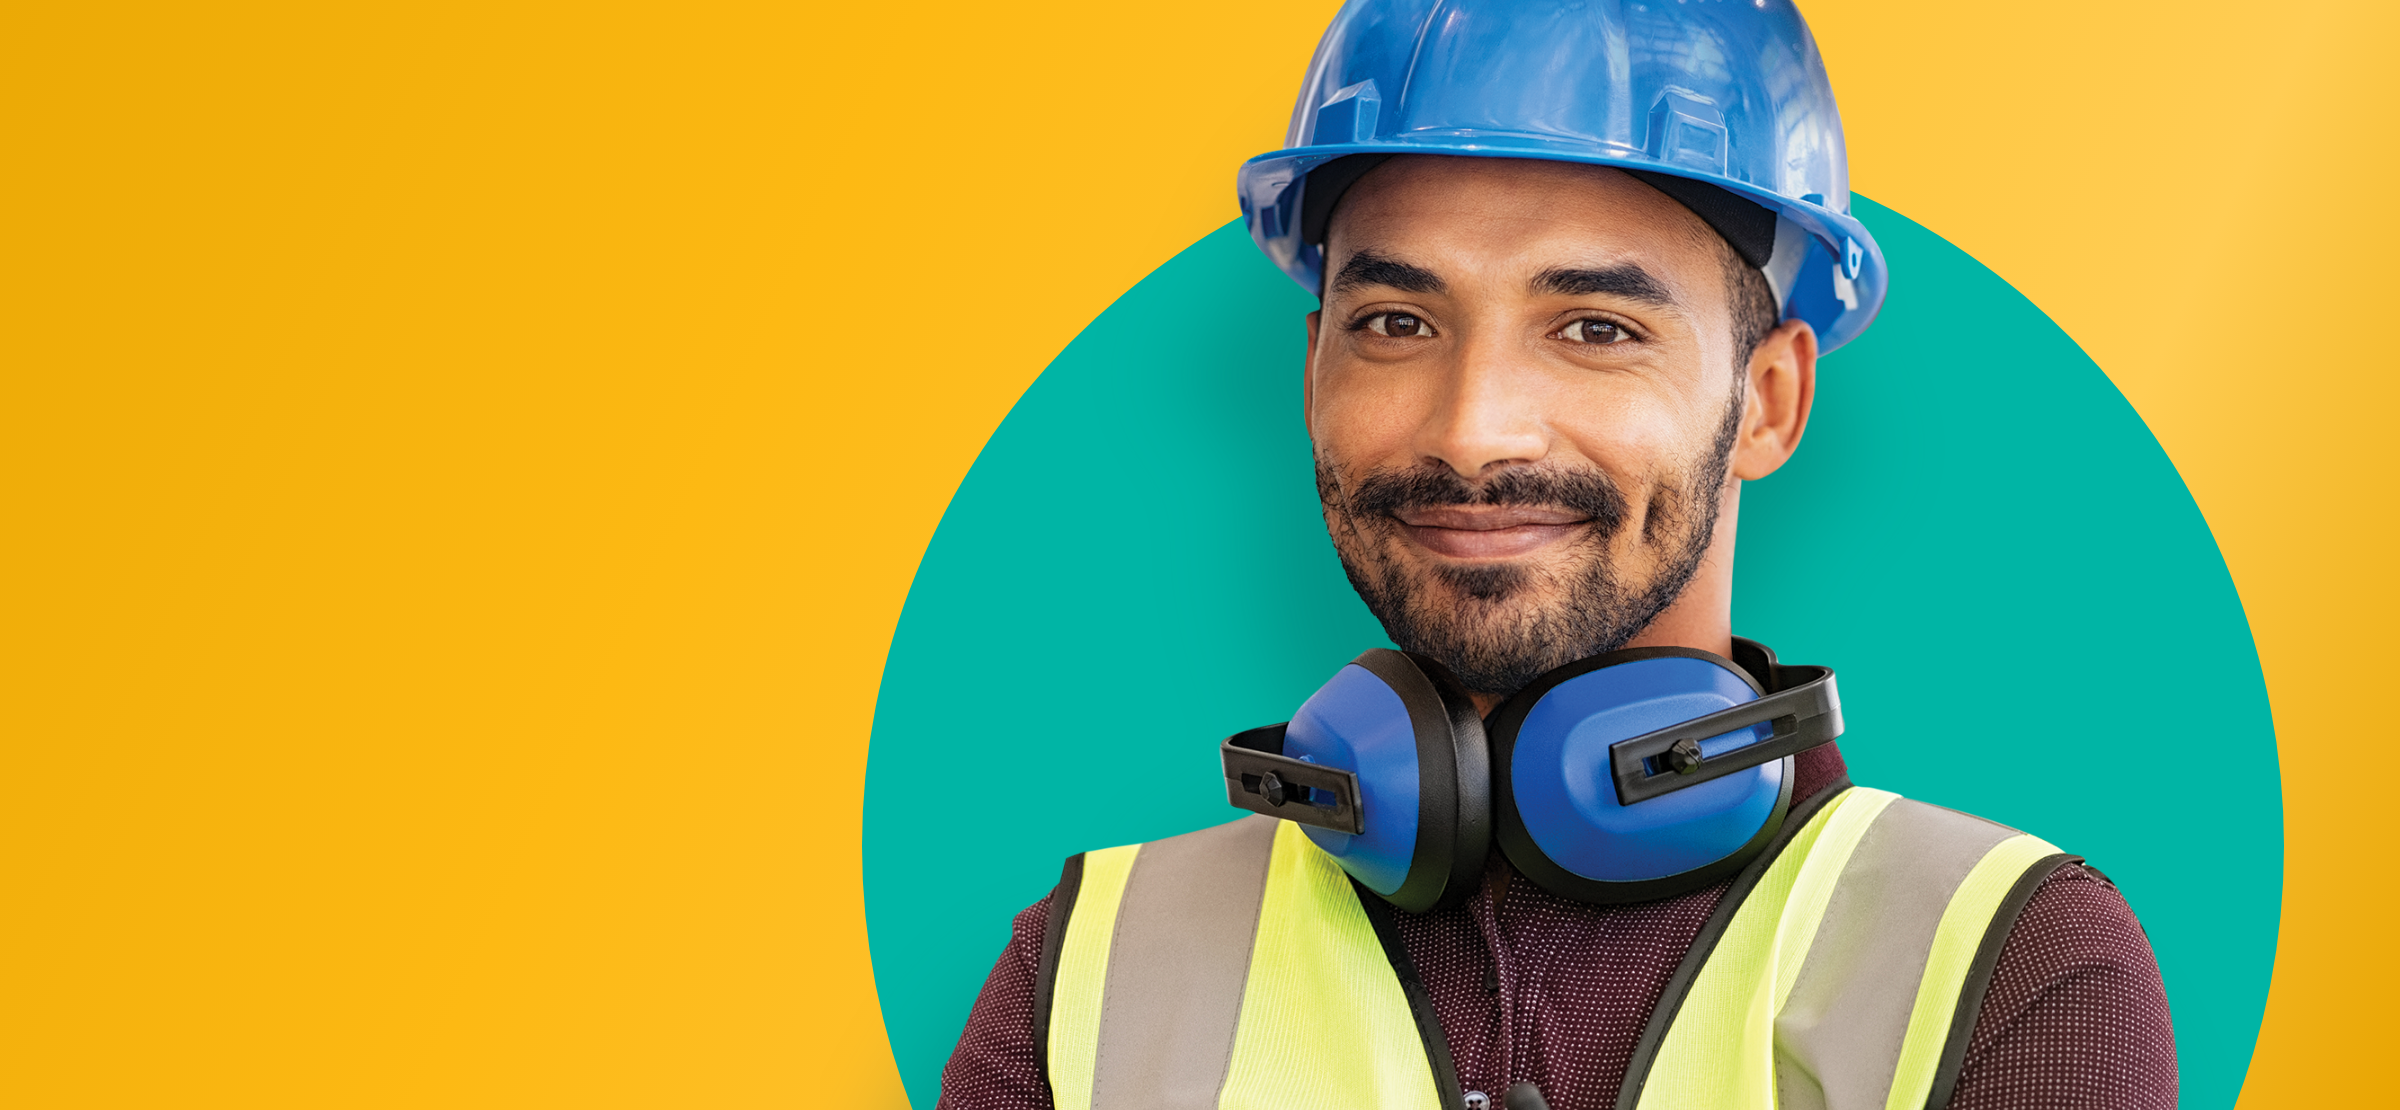 Smiling construction worker with a blue hard hat and blue earphones.